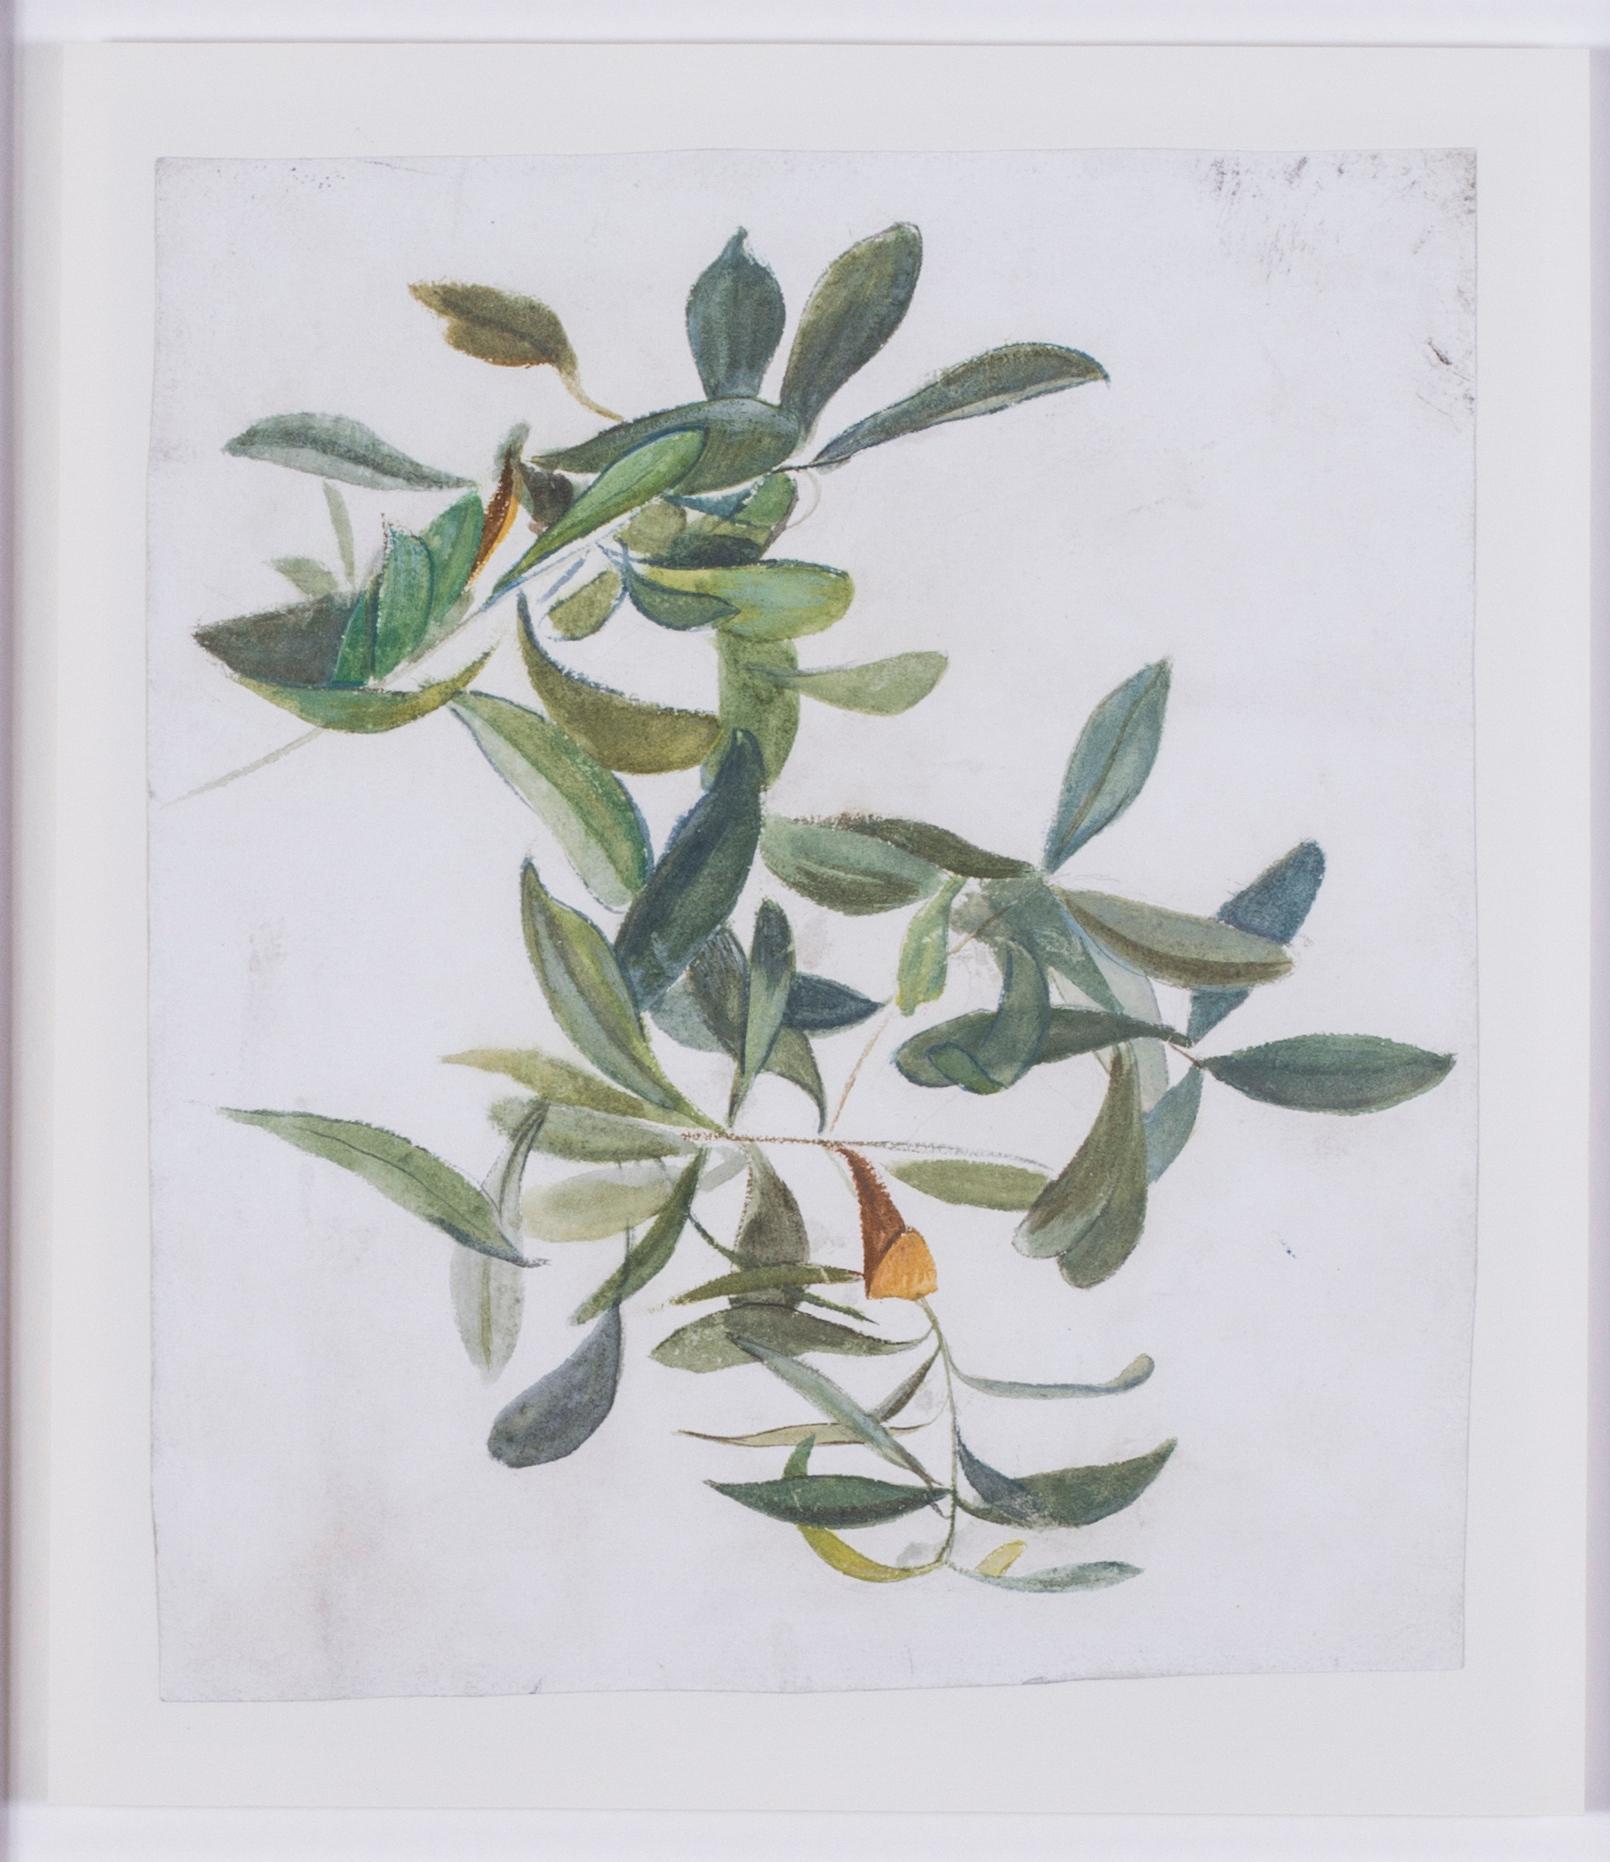 Evelyn De Morgan (British, 1855 – 1919)
An olive branch
Watercolour on paper
9 x 7.1/2 in. (22.8 x 19 cm.)
Provenance: The Clayton-Stamm Collection.  
Dominic Winter, Cirencester, 8th November 2018, lot 464

Evelyn de Morgan is identified as one of